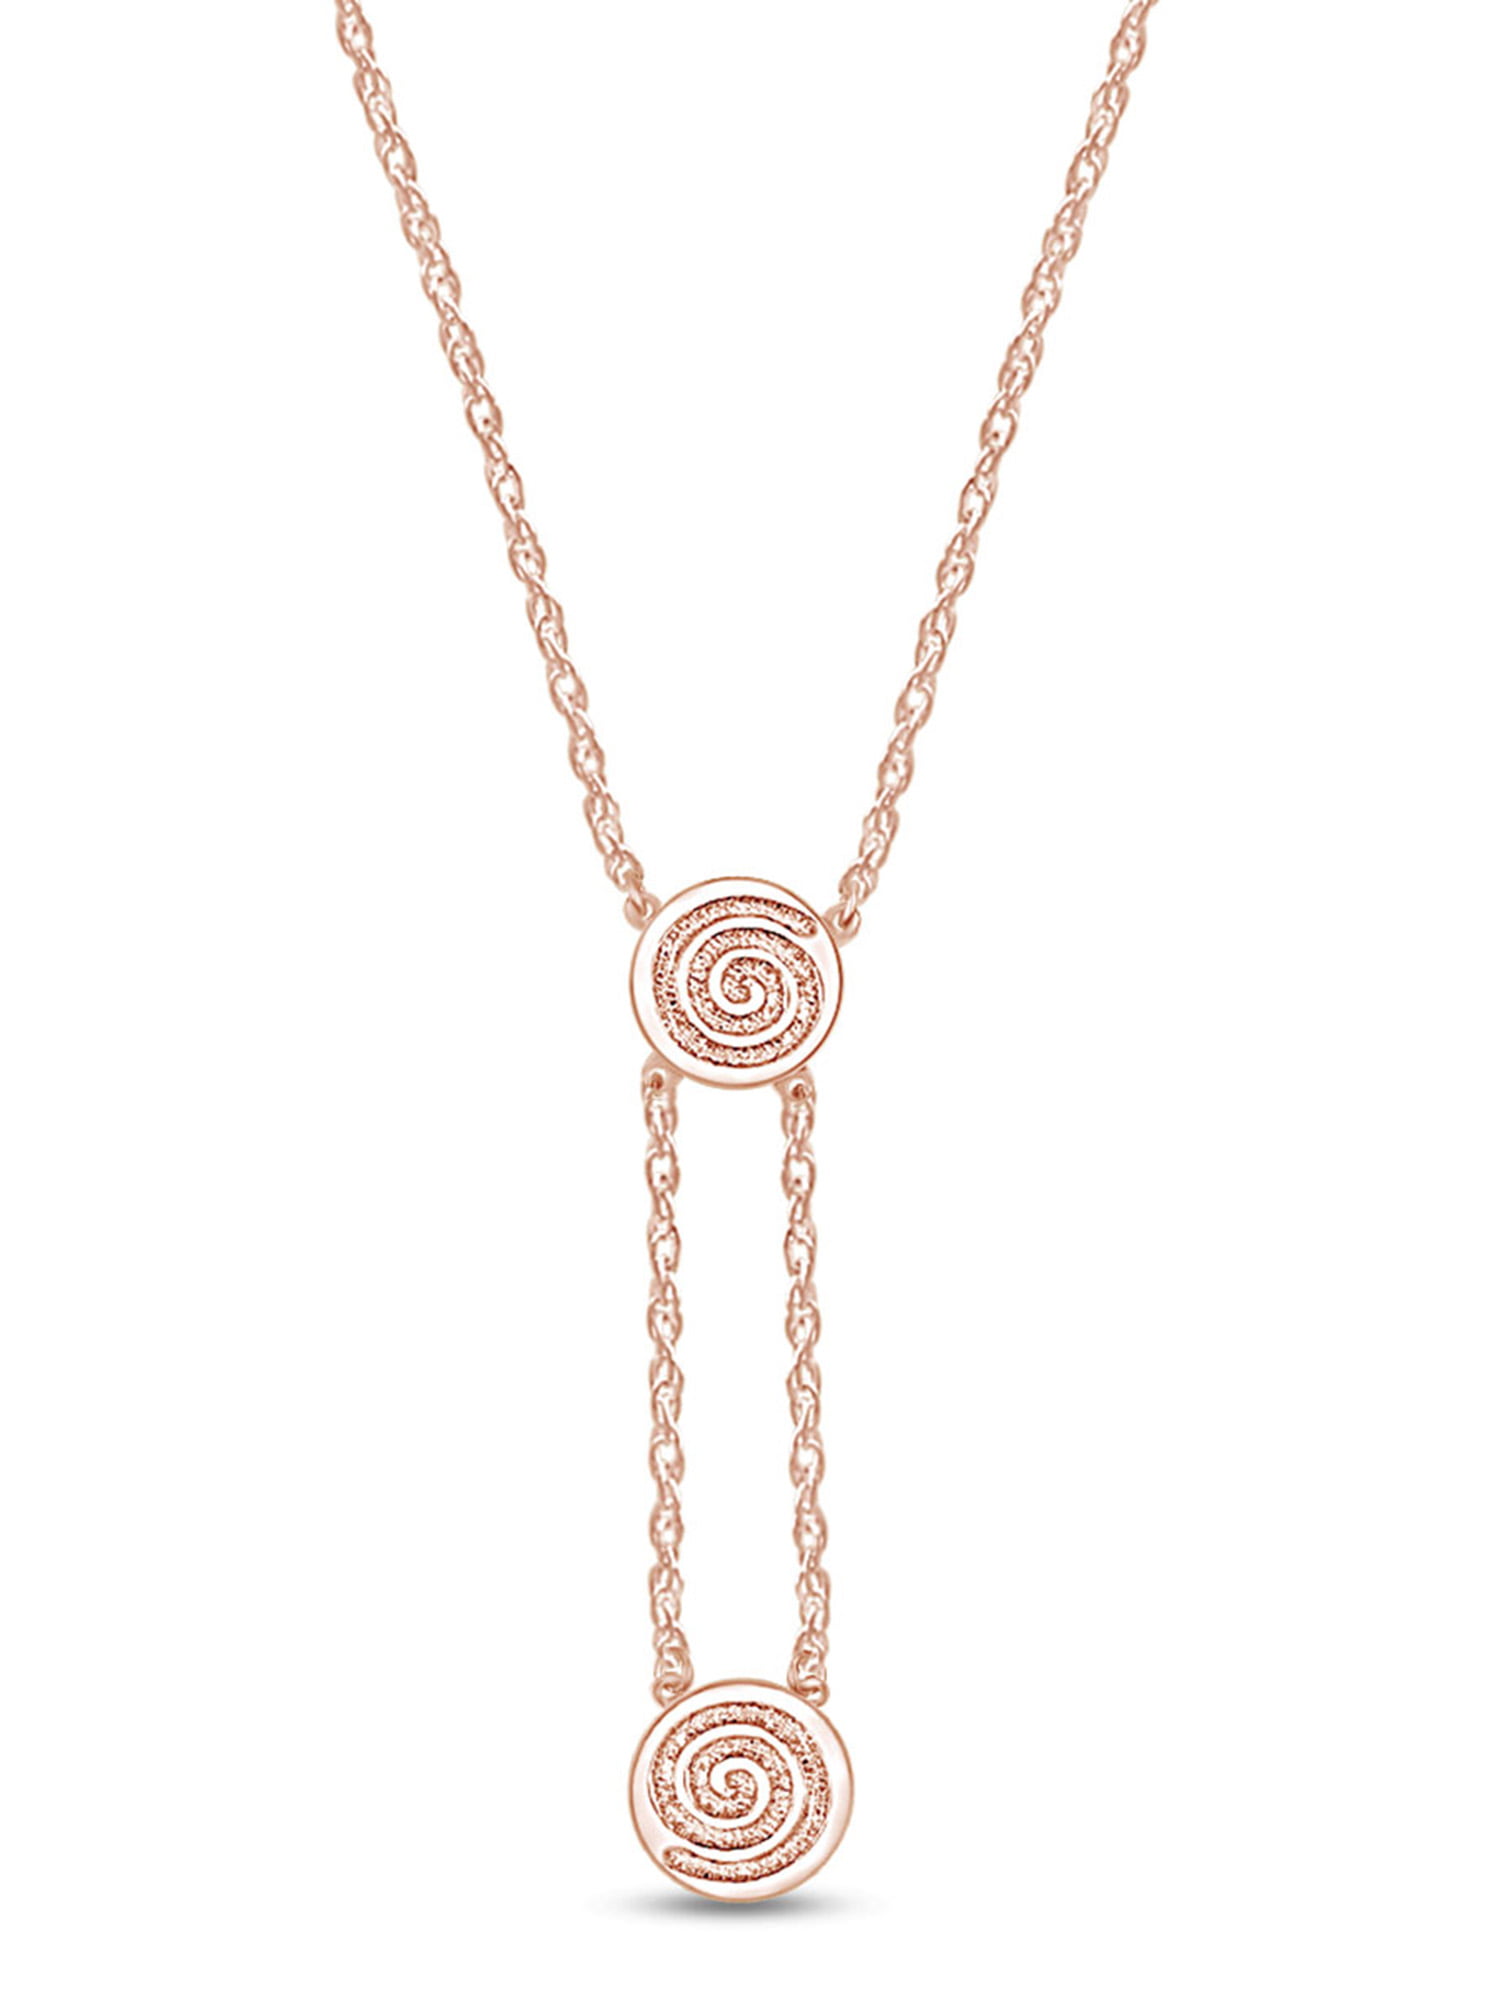 AFFY Luckiest Four Leaf Clover White Cubic Zirconia Pendant Necklace in 14K Rose Gold Over Sterling Silver